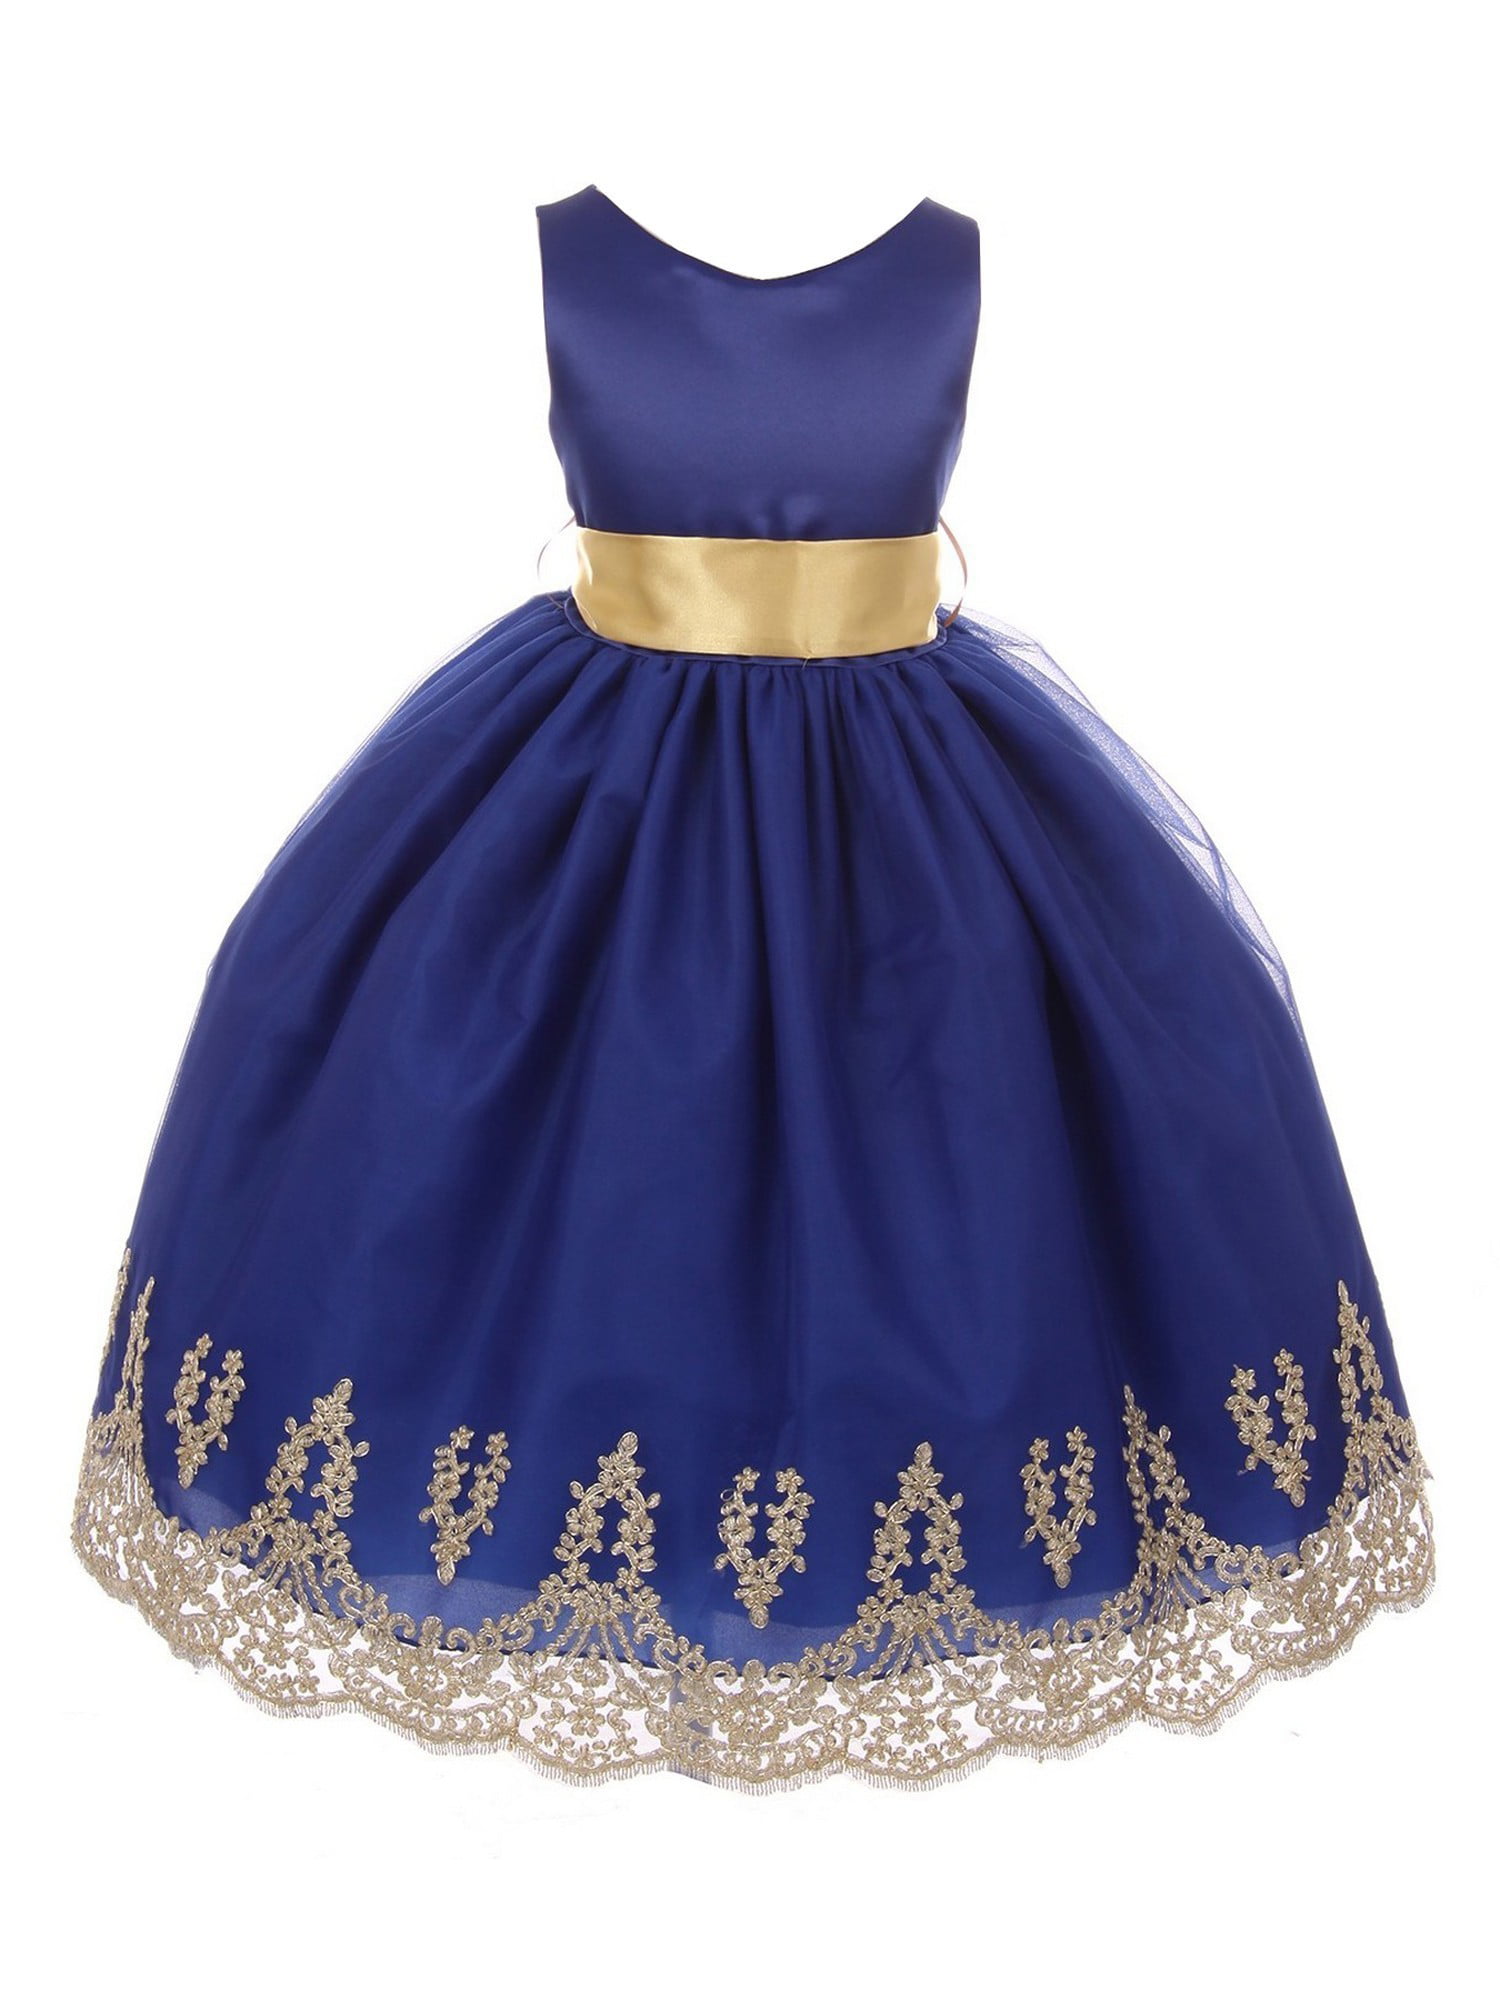 Chic Baby Little Girls Royal Blue Gold Lace Embroidered Dress